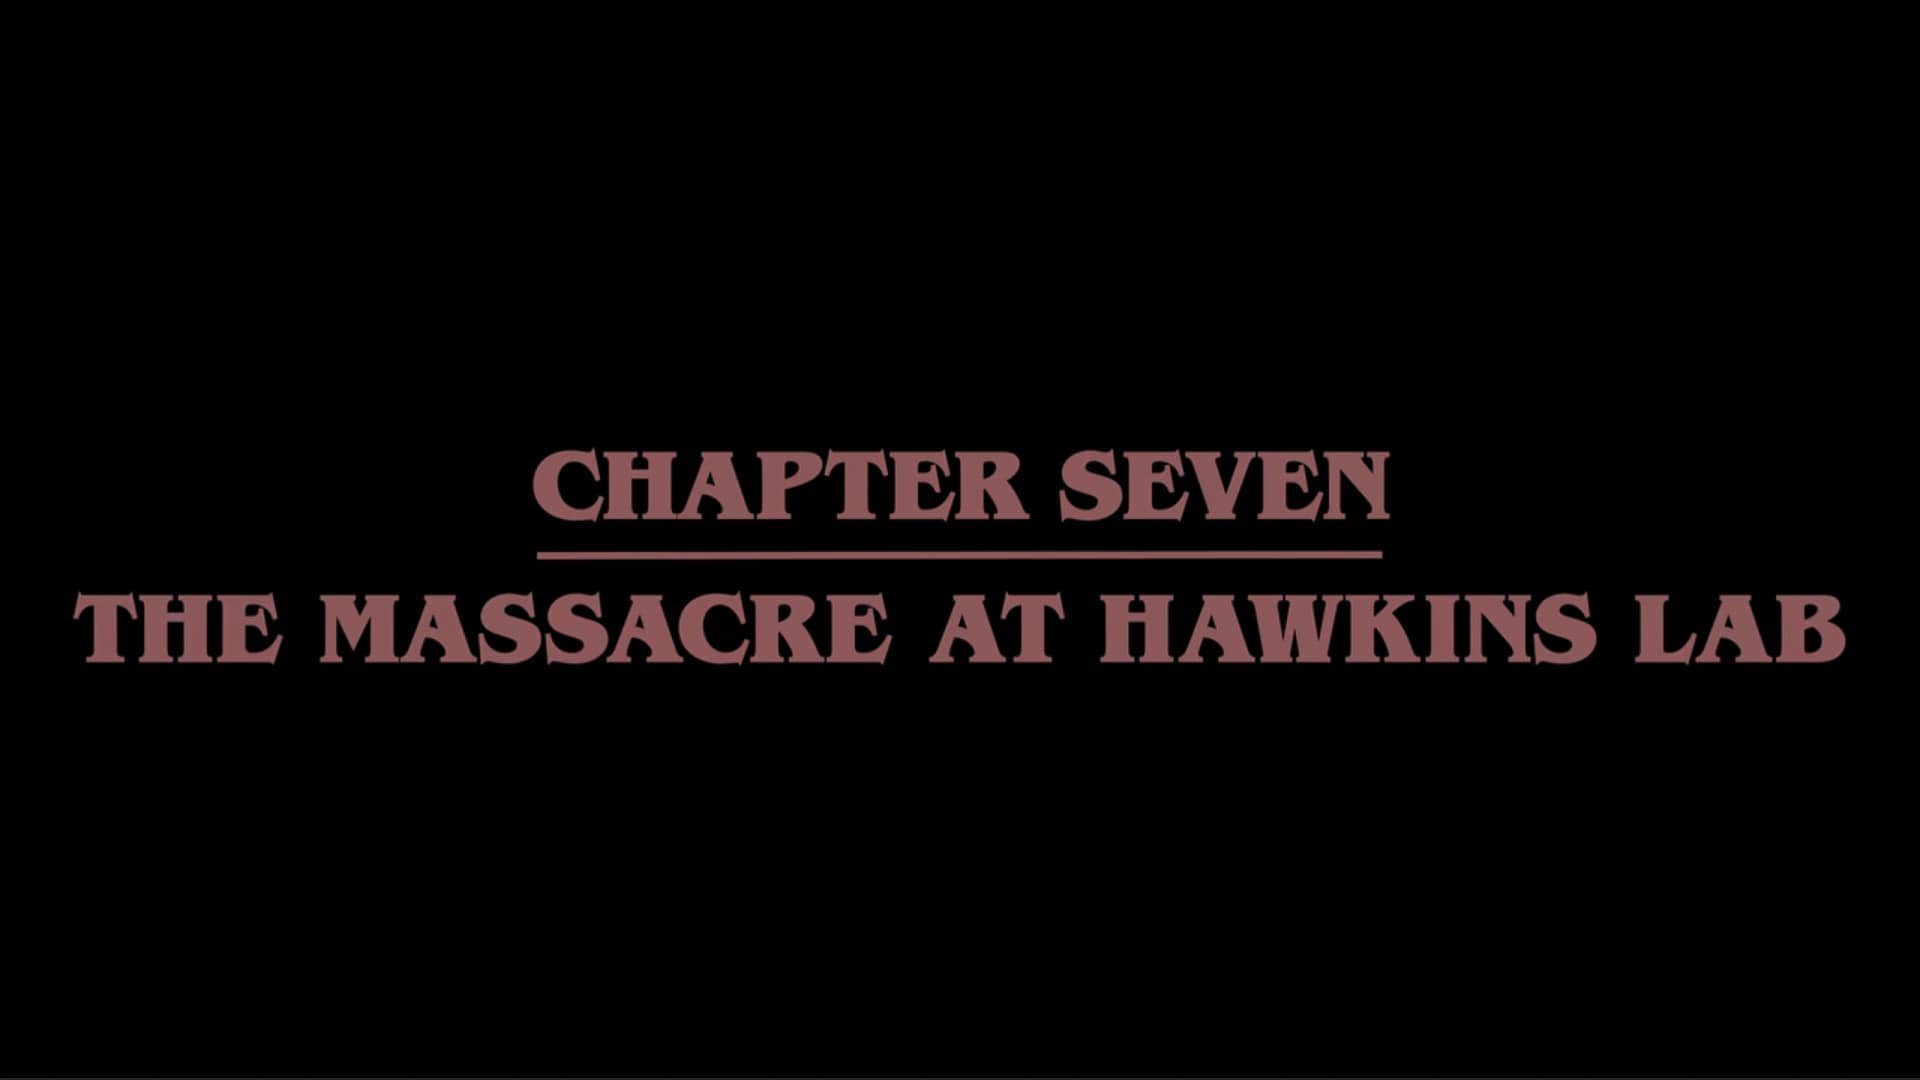 Title Card - Stranger Things Season 4 Episode 7 “Chapter Seven The Massacre At Hawkins Labs”